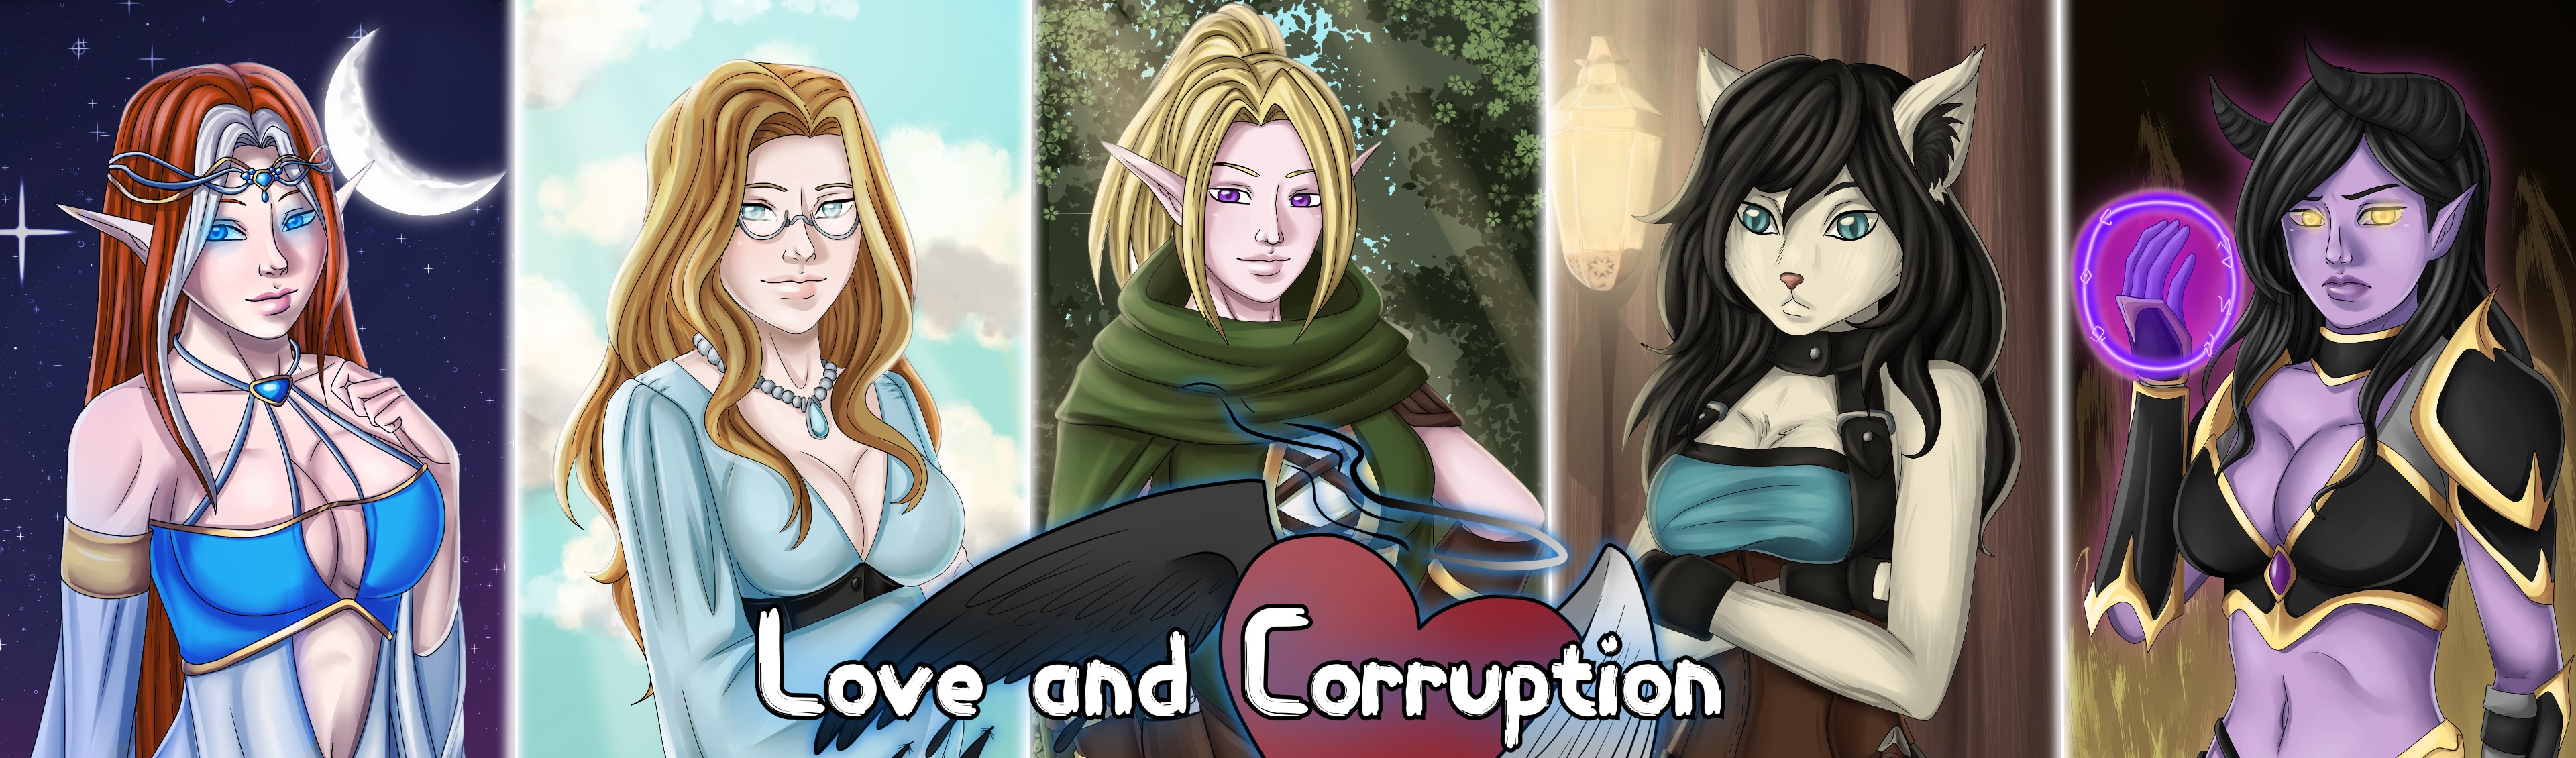 Love and corruption porn game